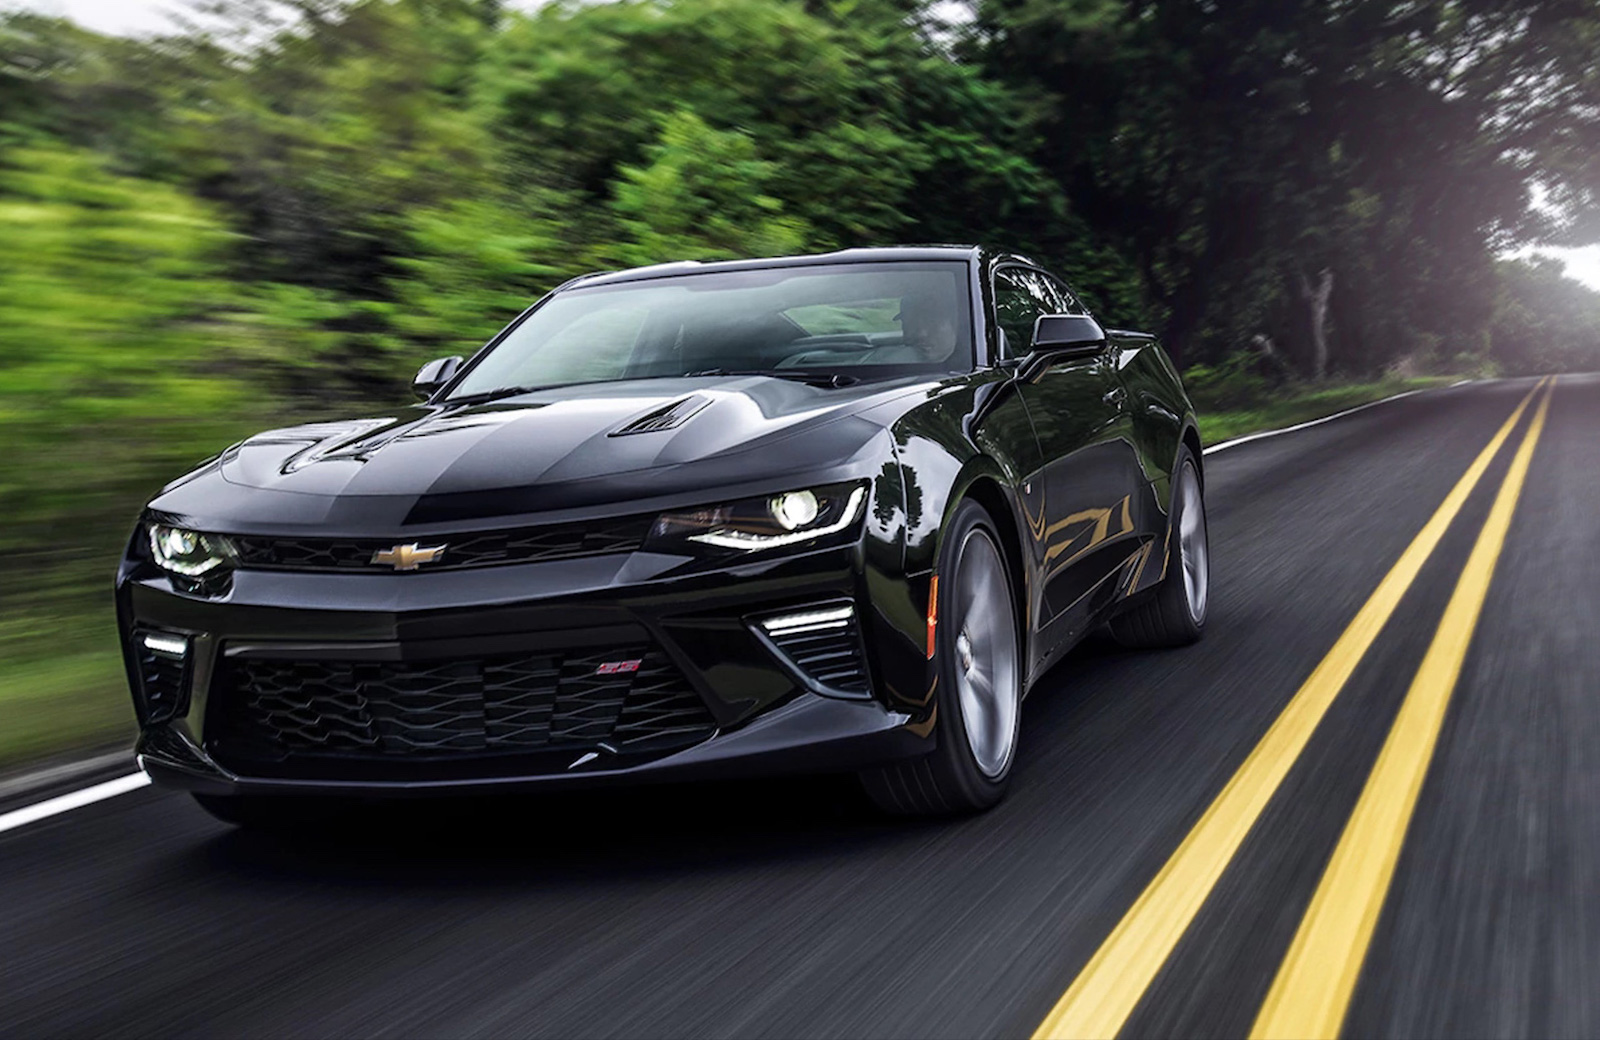 Further specs & key features confirmed for HSV Chevrolet Camaro